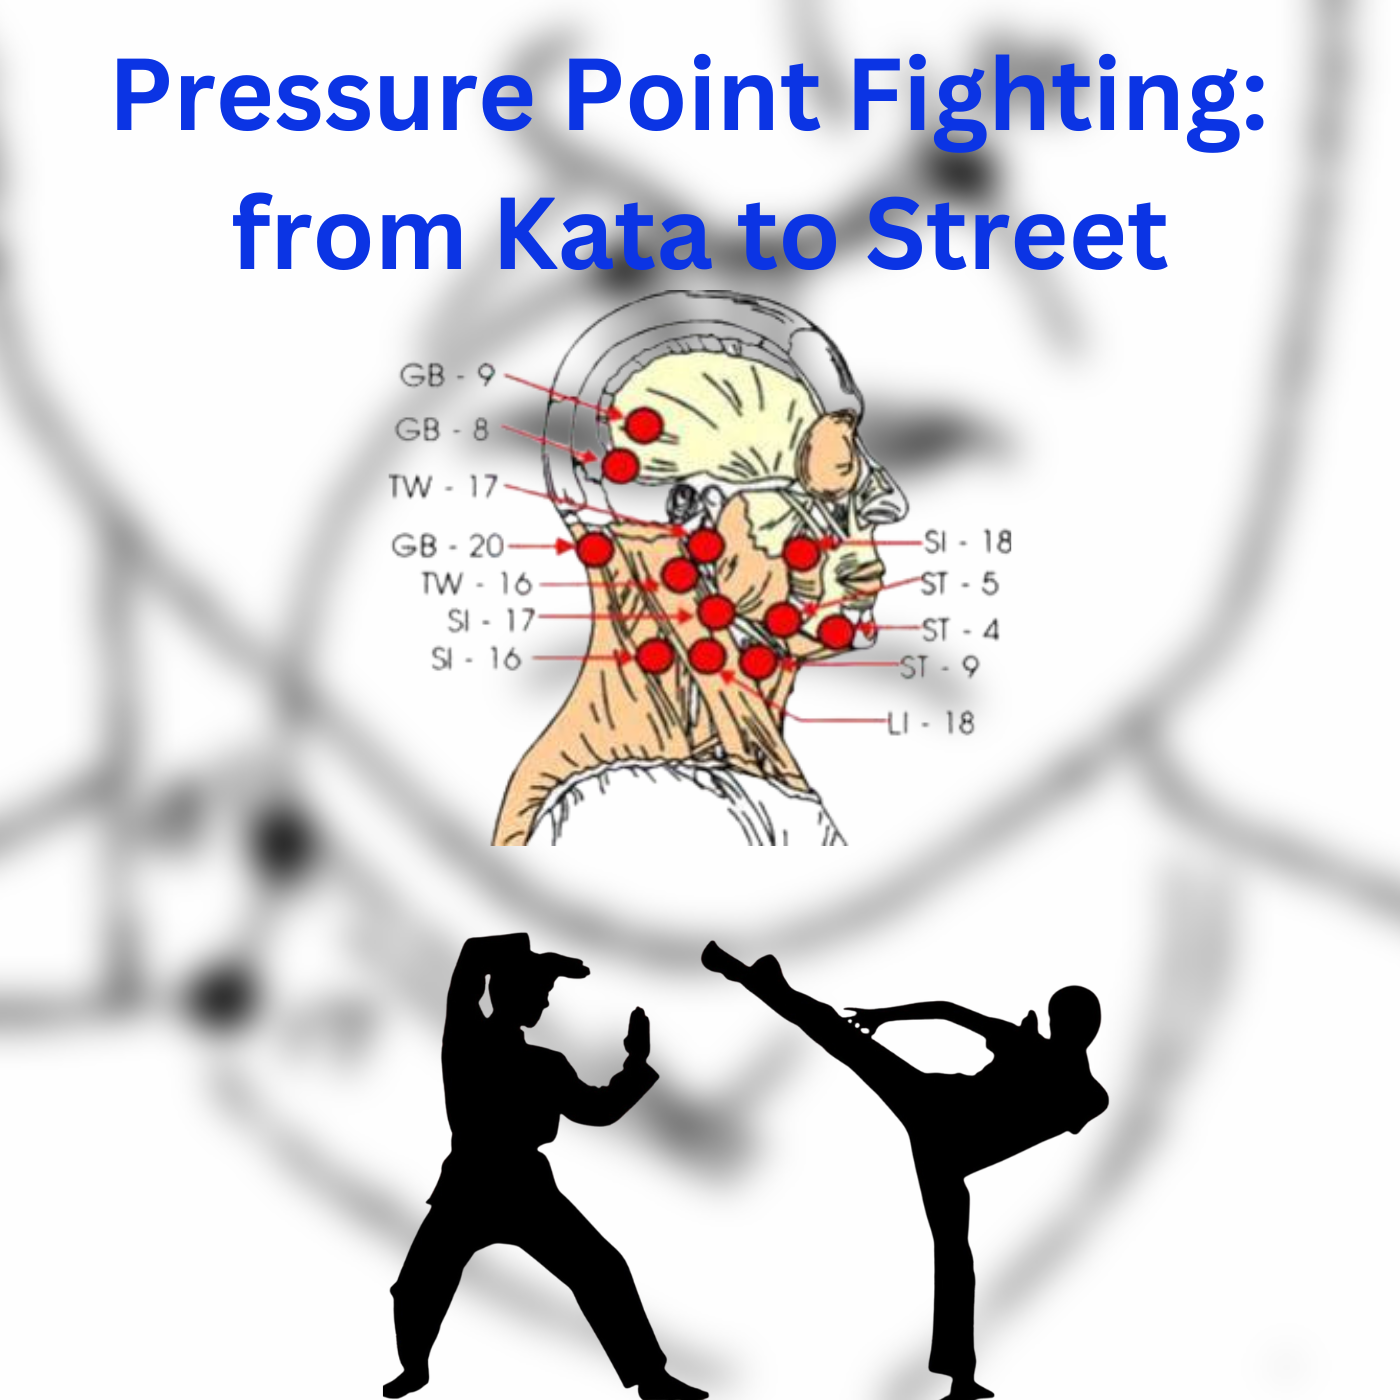 * Pressure Point Fighting: from Kata to Street